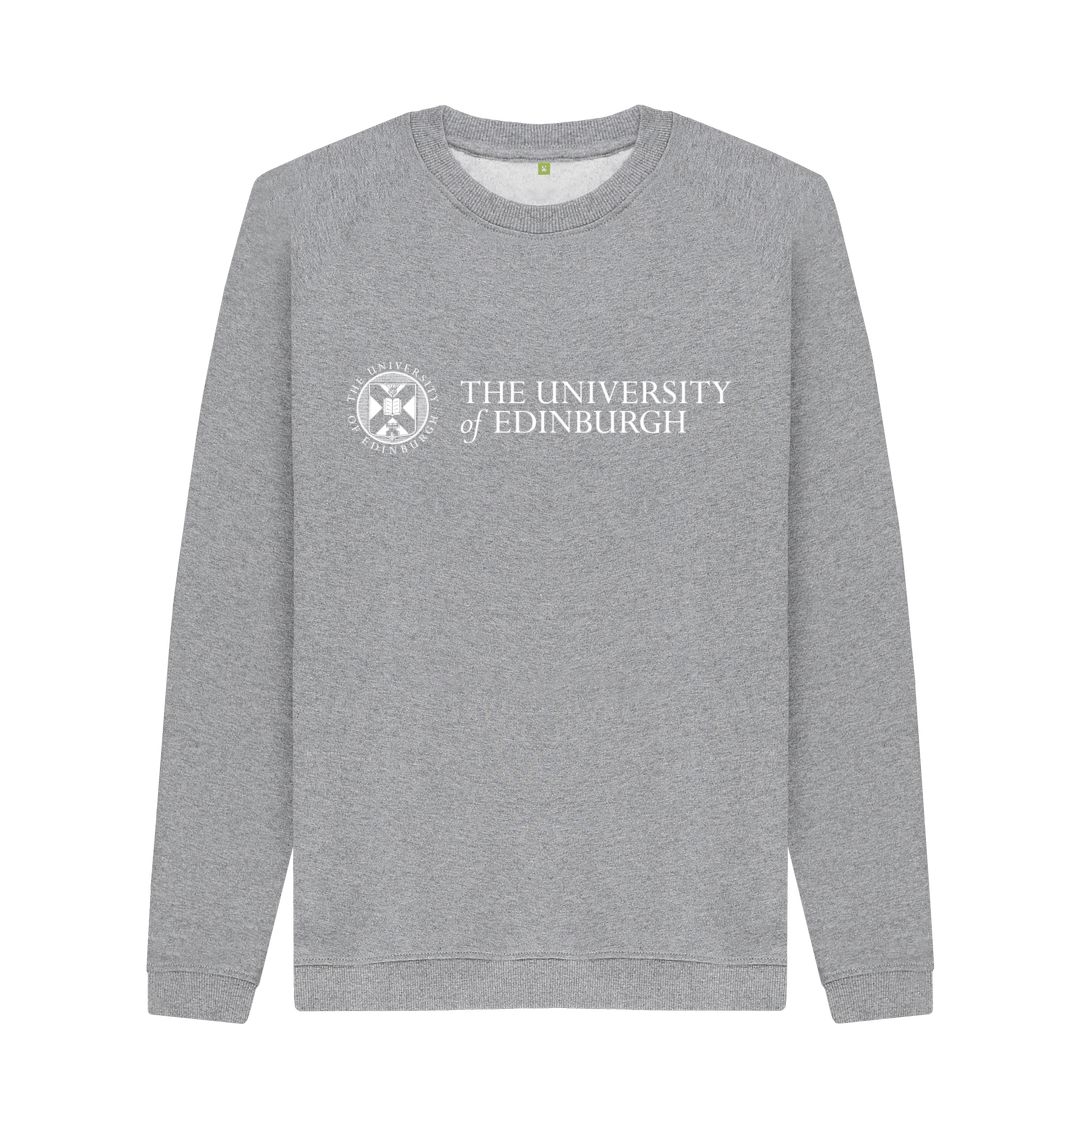 A light heather grey sweatshirt with the University logo printed across the chest in white